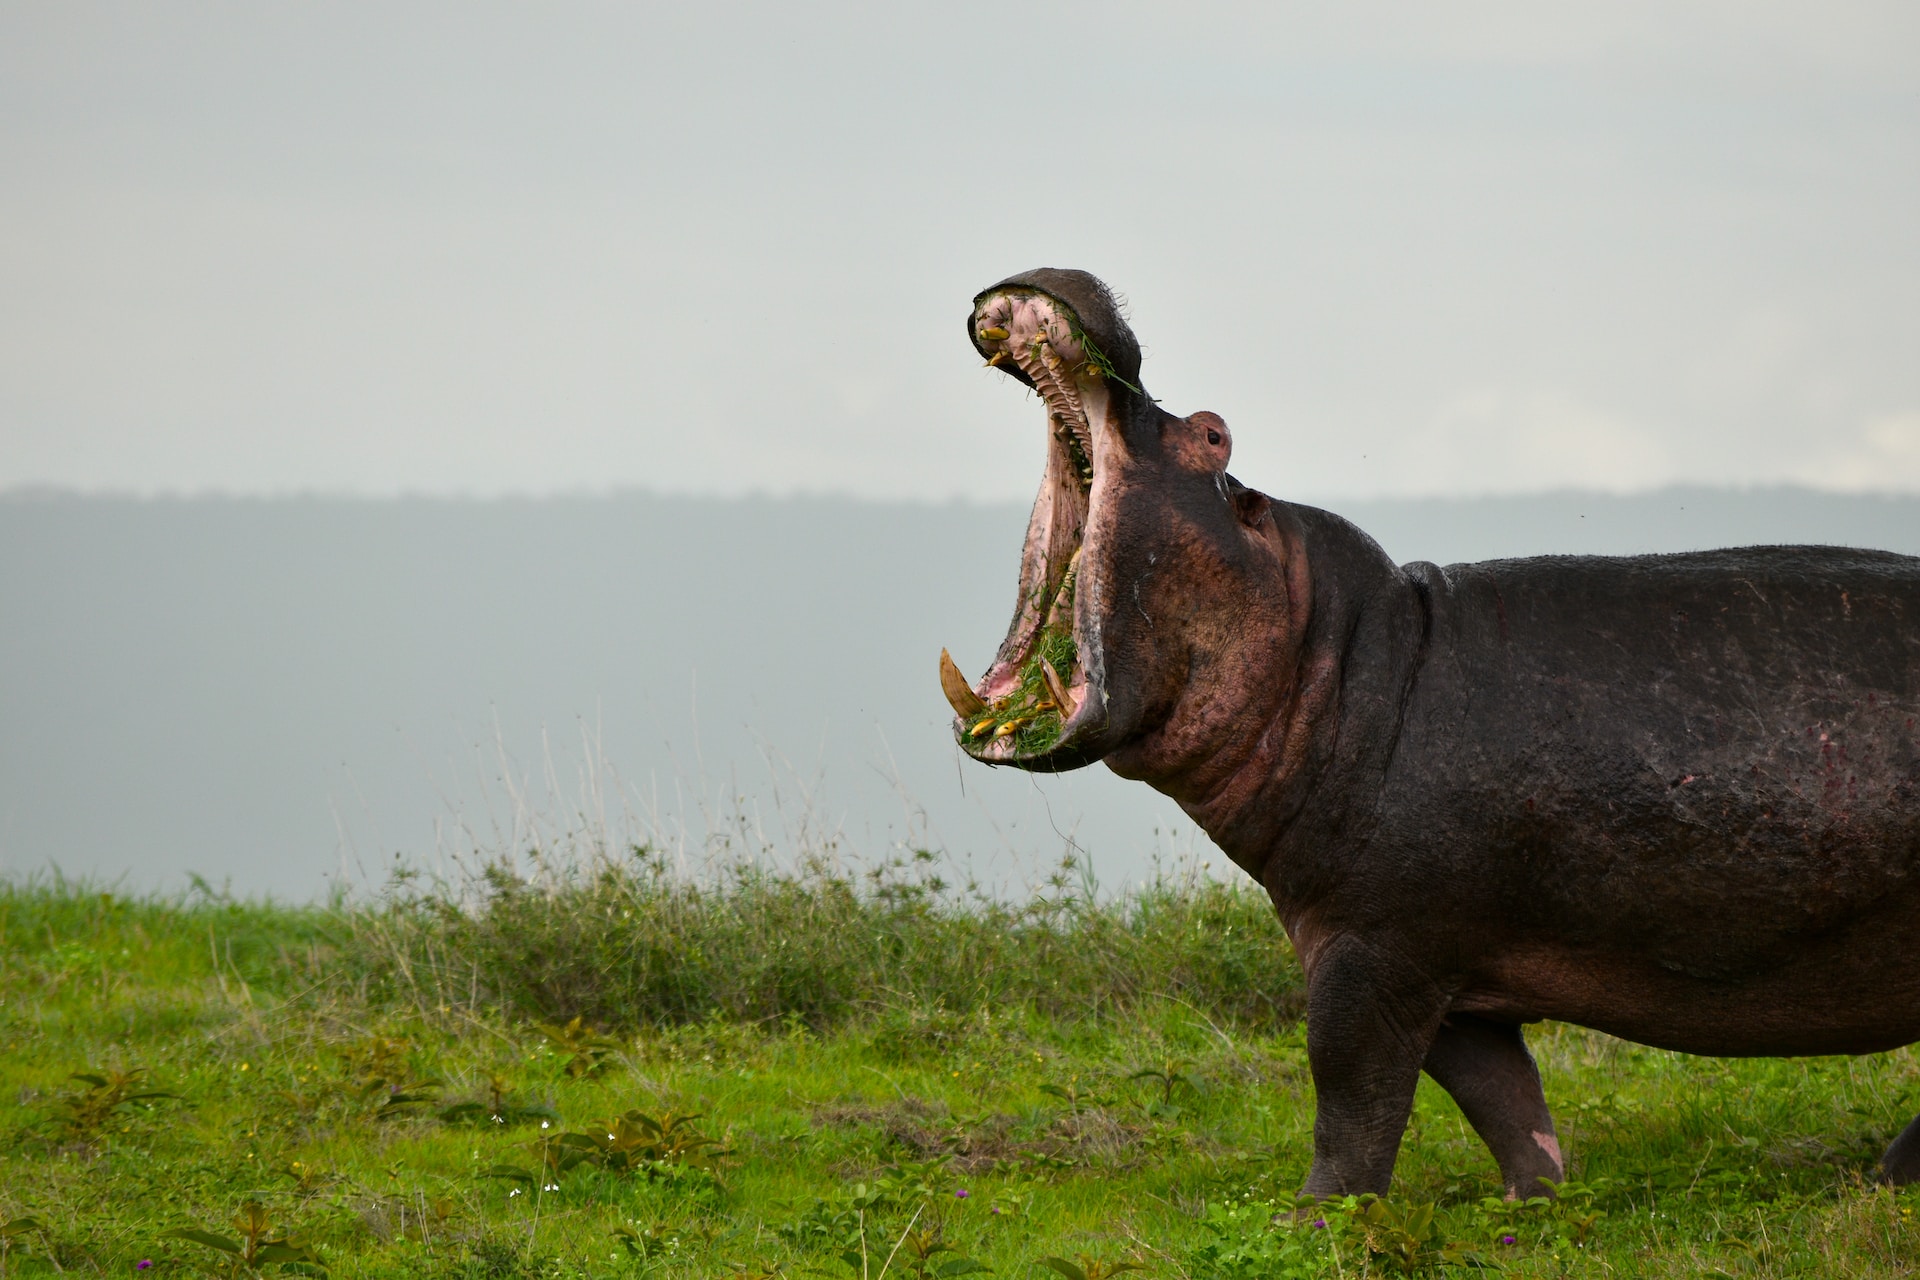 Top 10 Interesting Facts About Hippopotamuses (Hippo) You Should Know